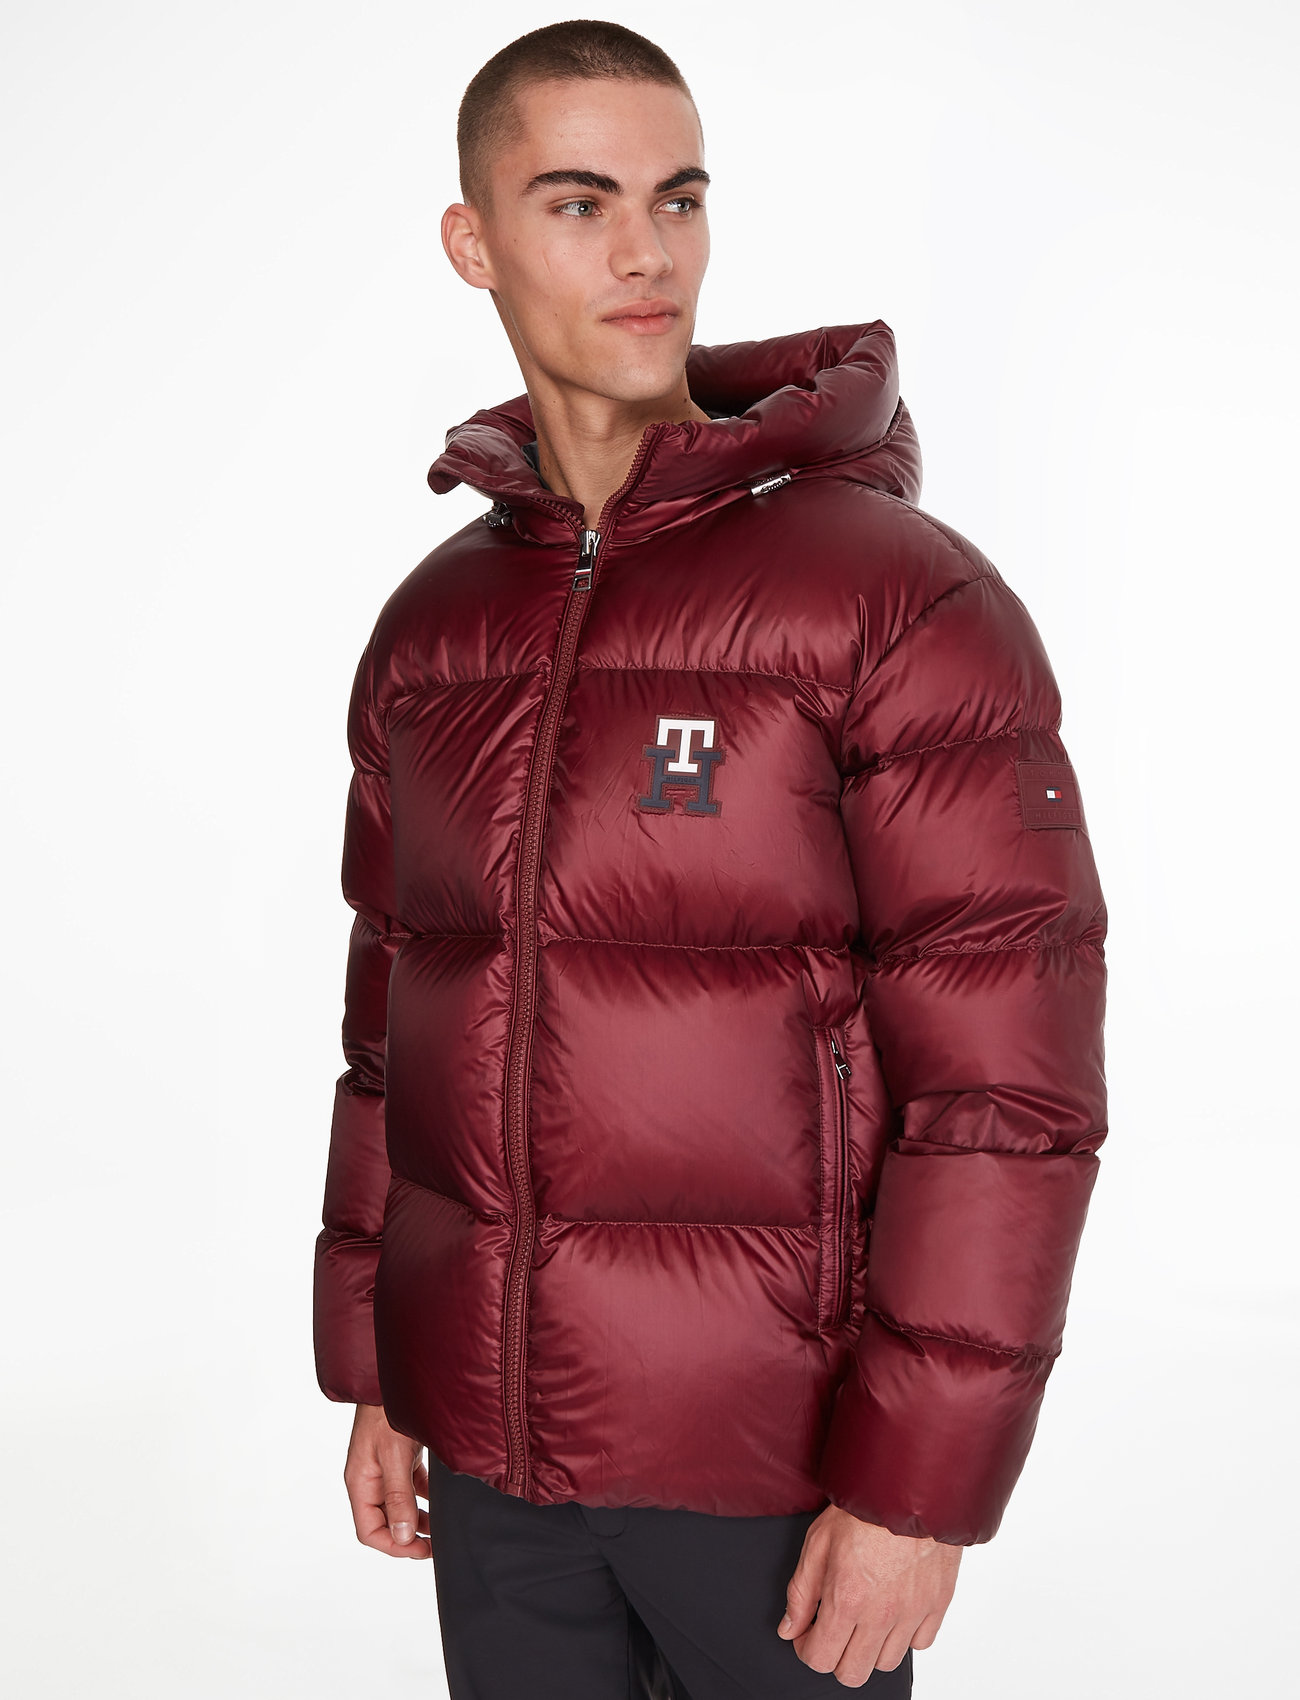 Tommy Hilfiger Ny Zero Gravity Down Hdd Puffer - 399.90 €. Buy Padded